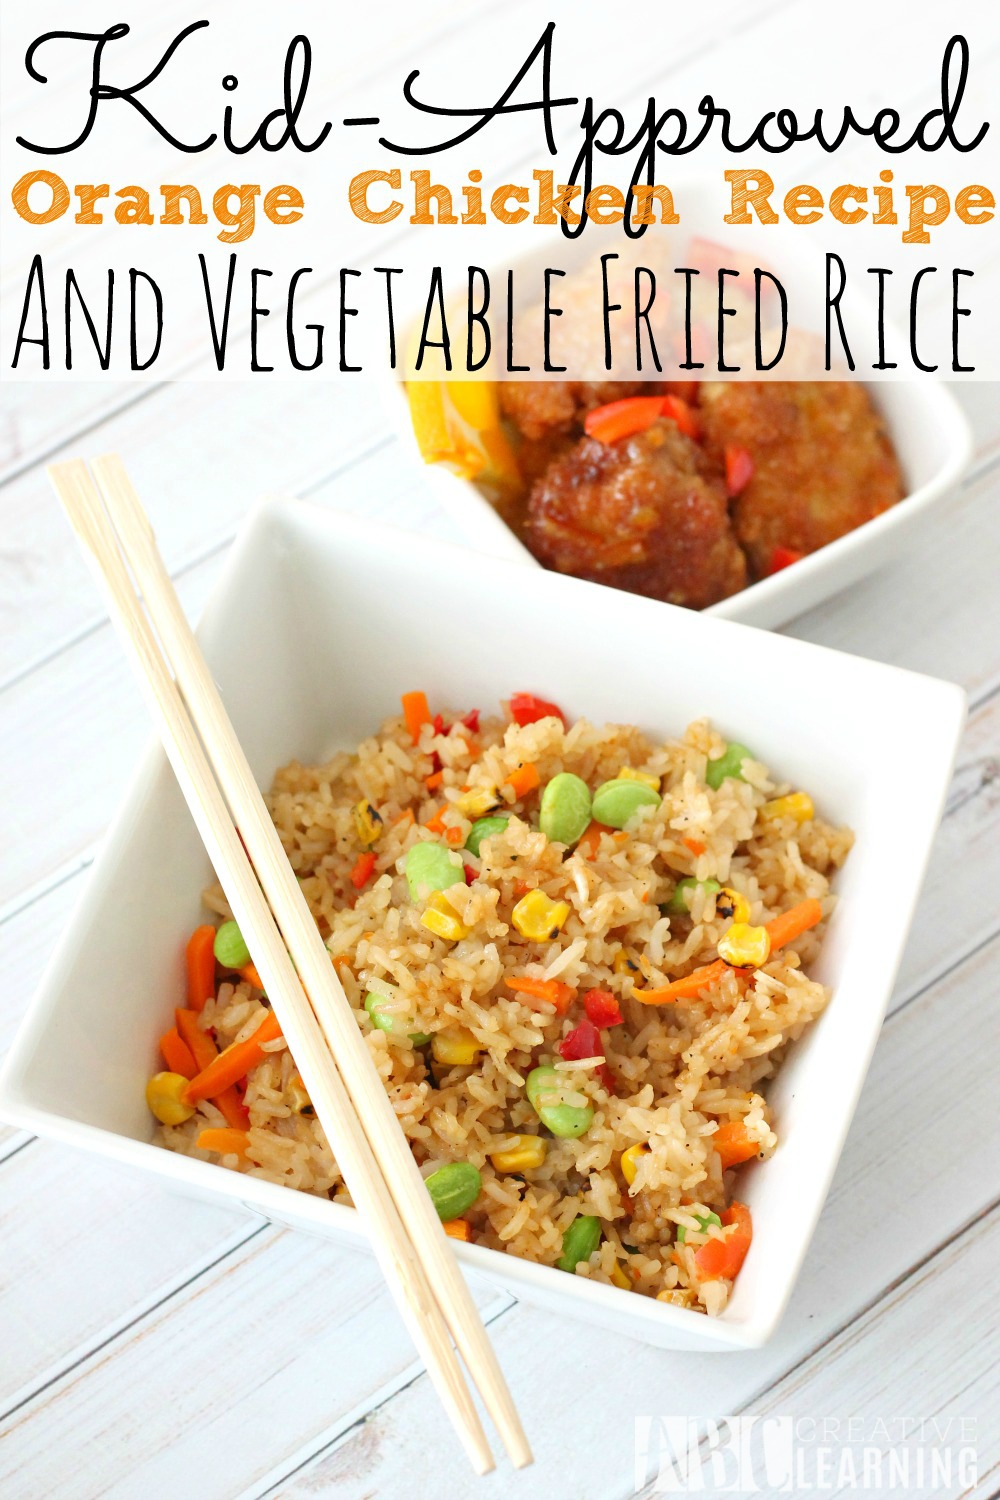 Kid-Approved Orange Chicken Recipe and Vegetable Fried Rice